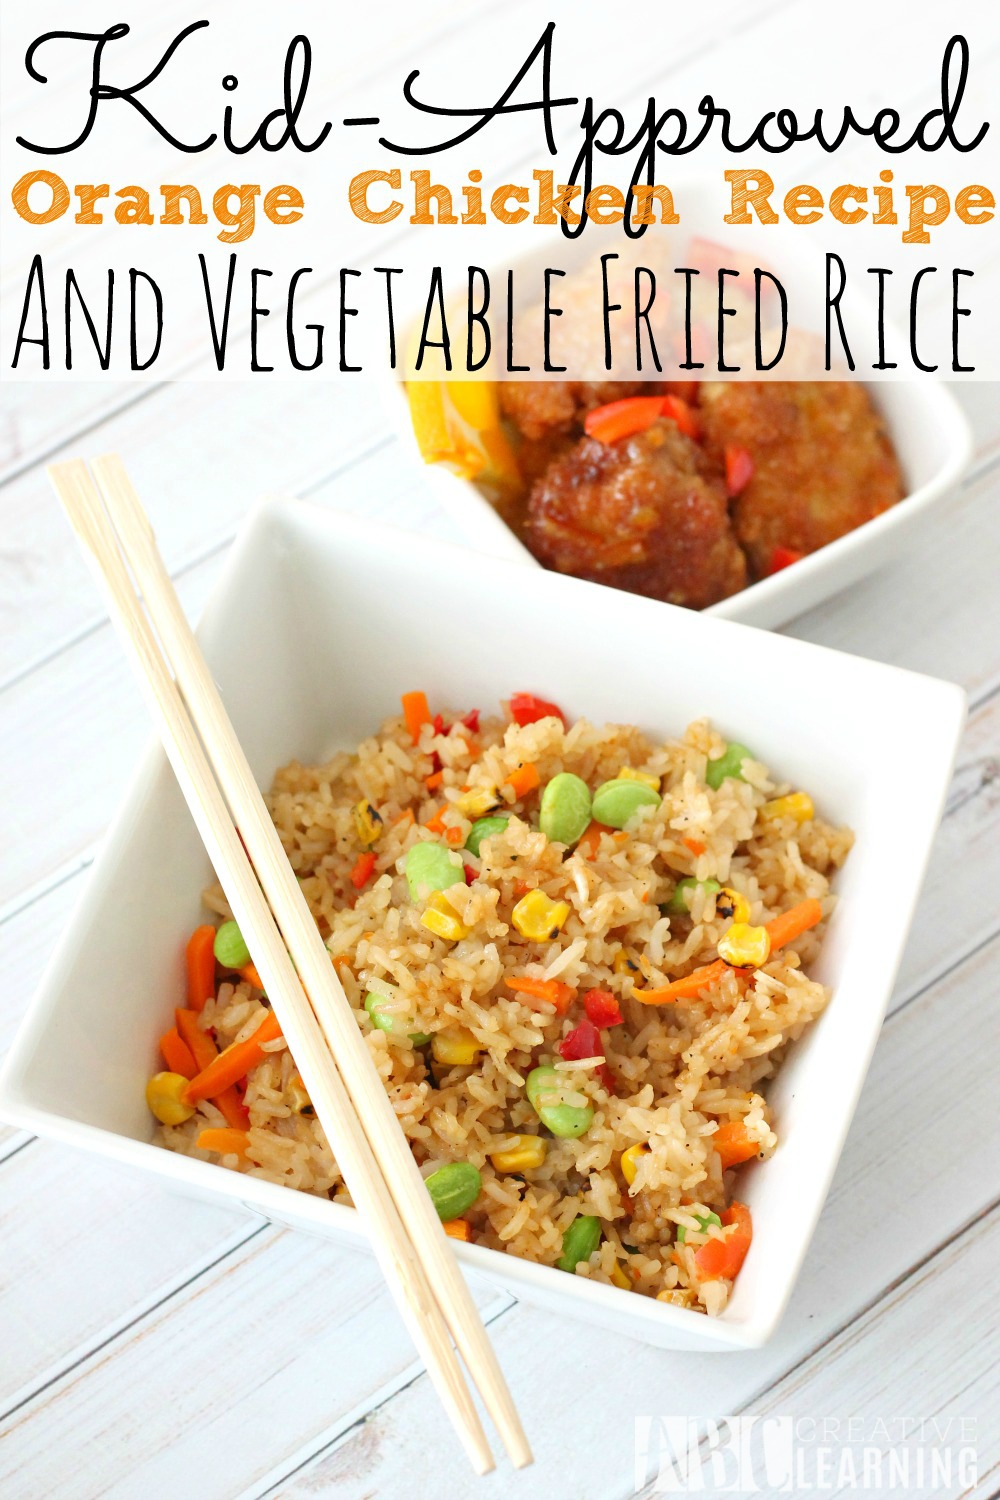 Kid-Approved Orange Chicken Recipe and Vegetable Fried Rice